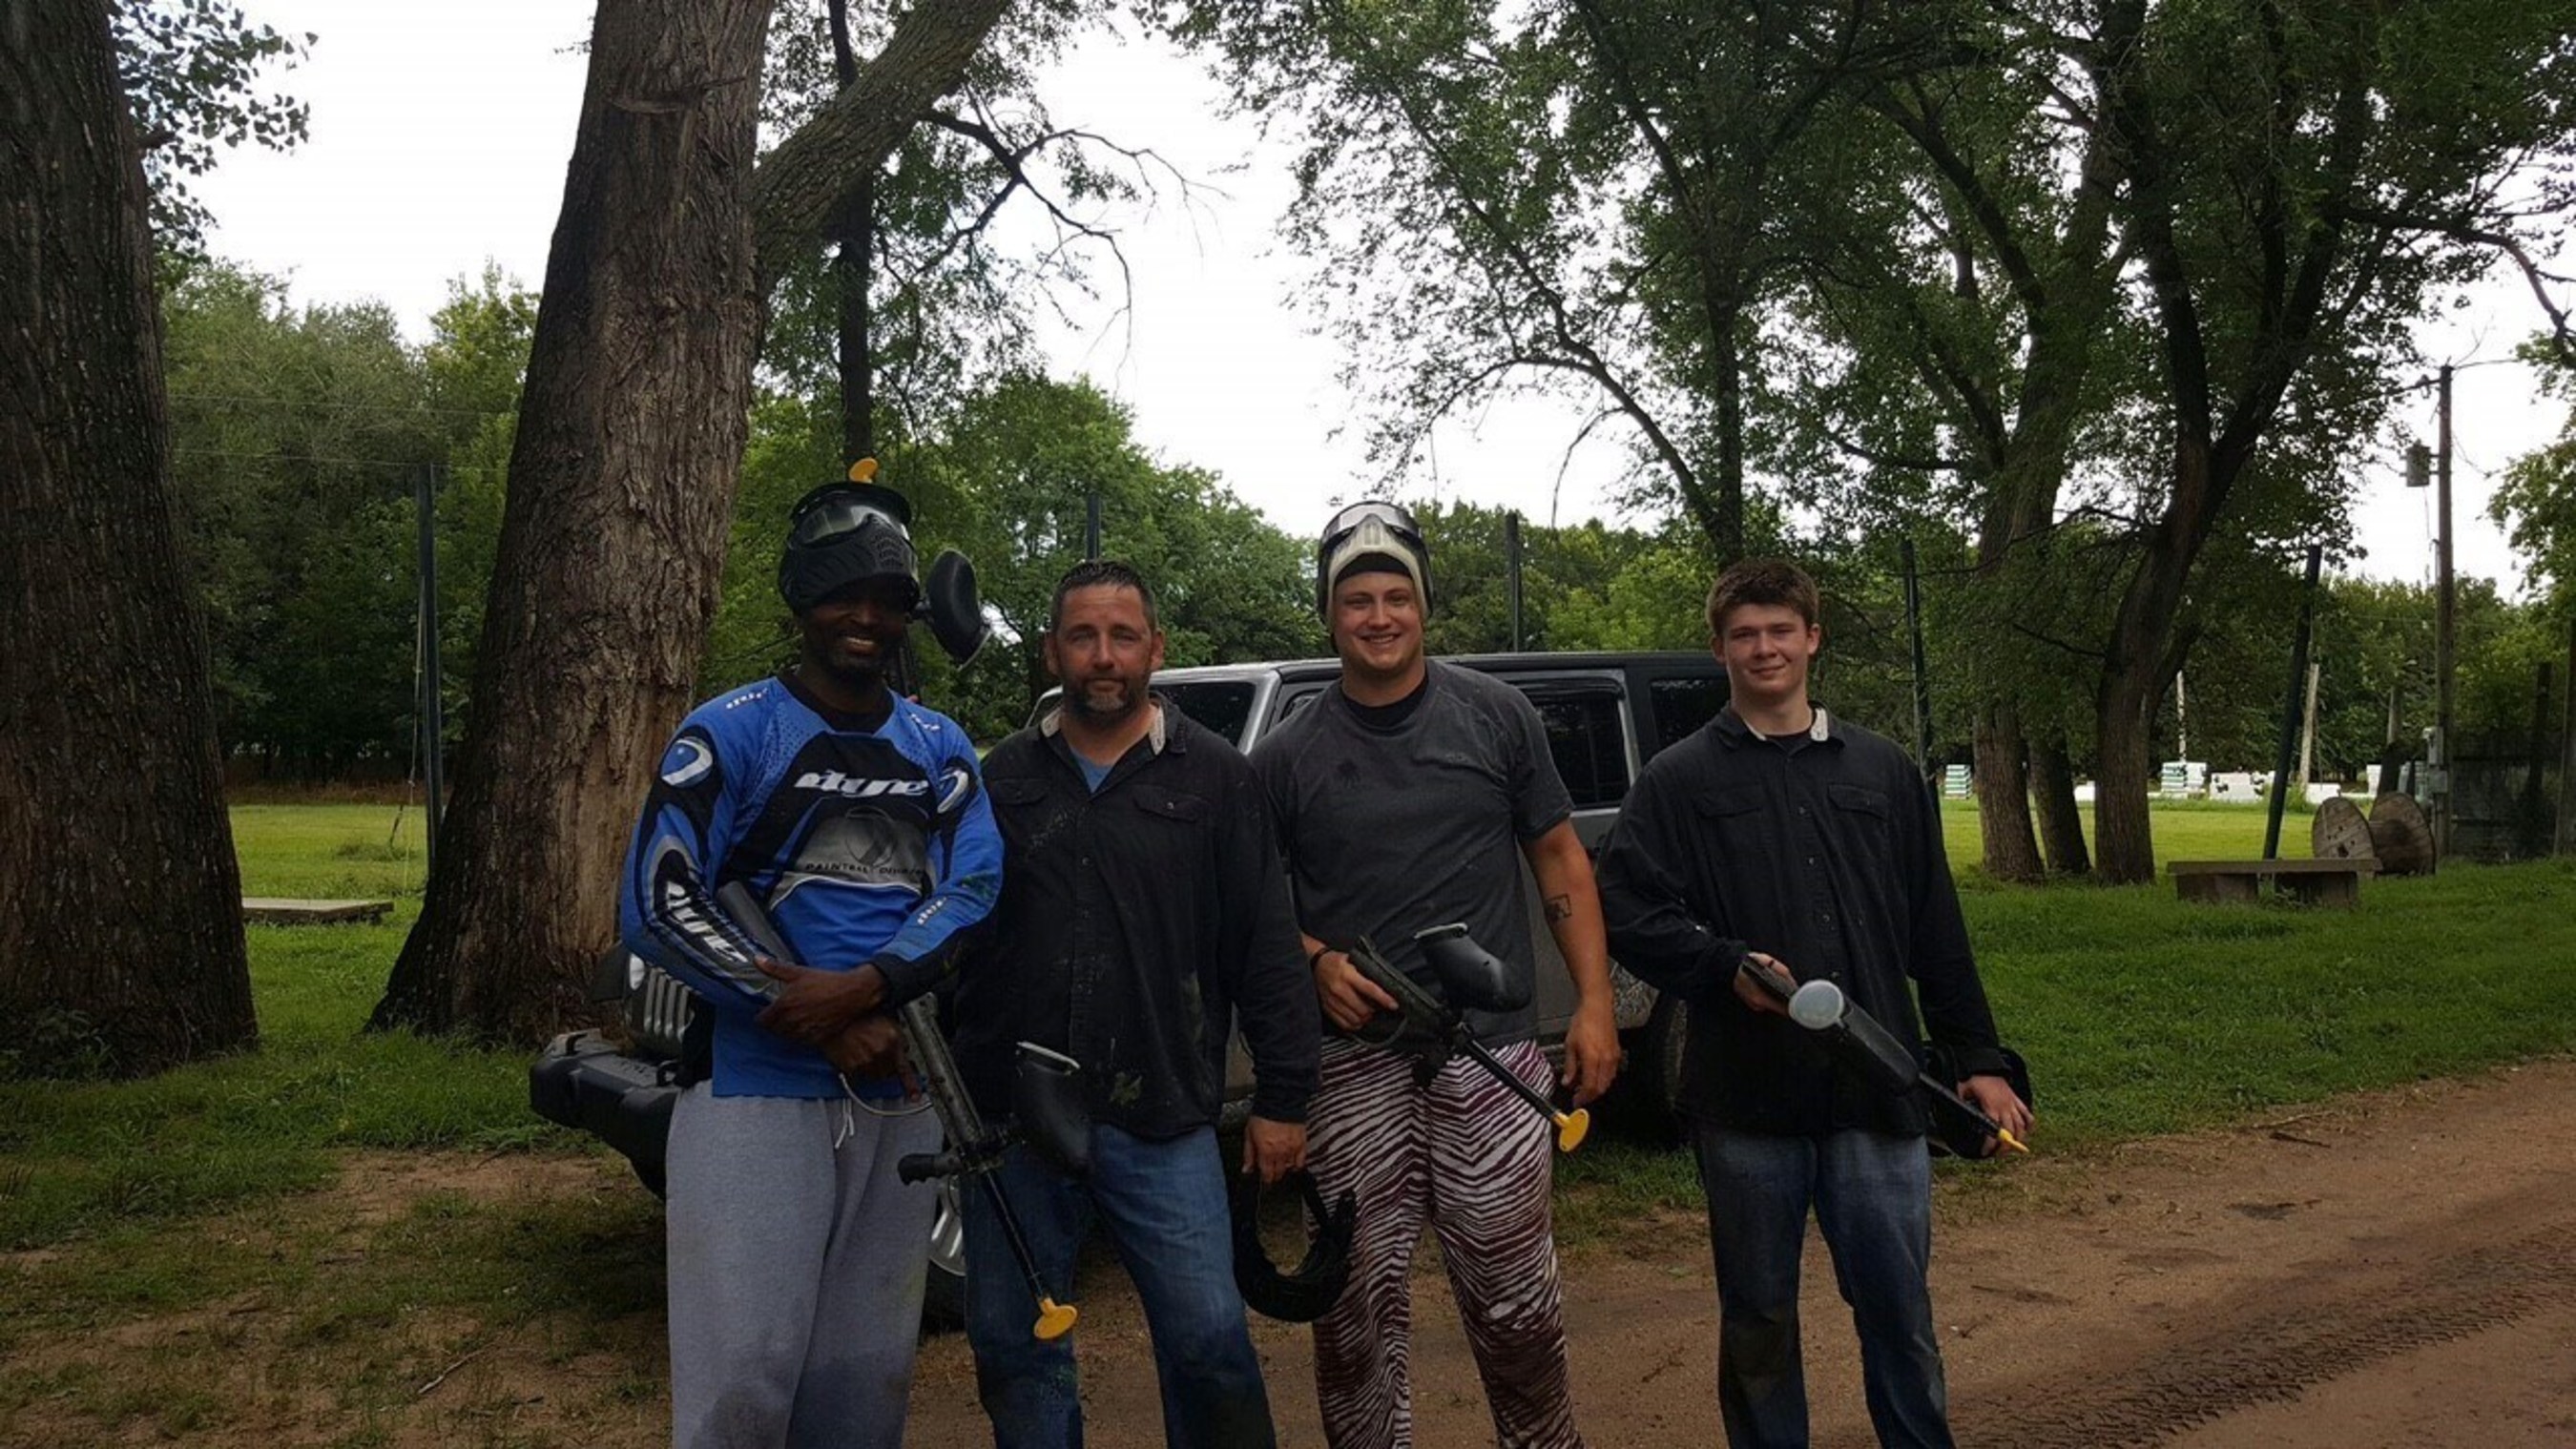 Veterans and guests braved the rain for an afternoon of paintball at Graffiti LLC.